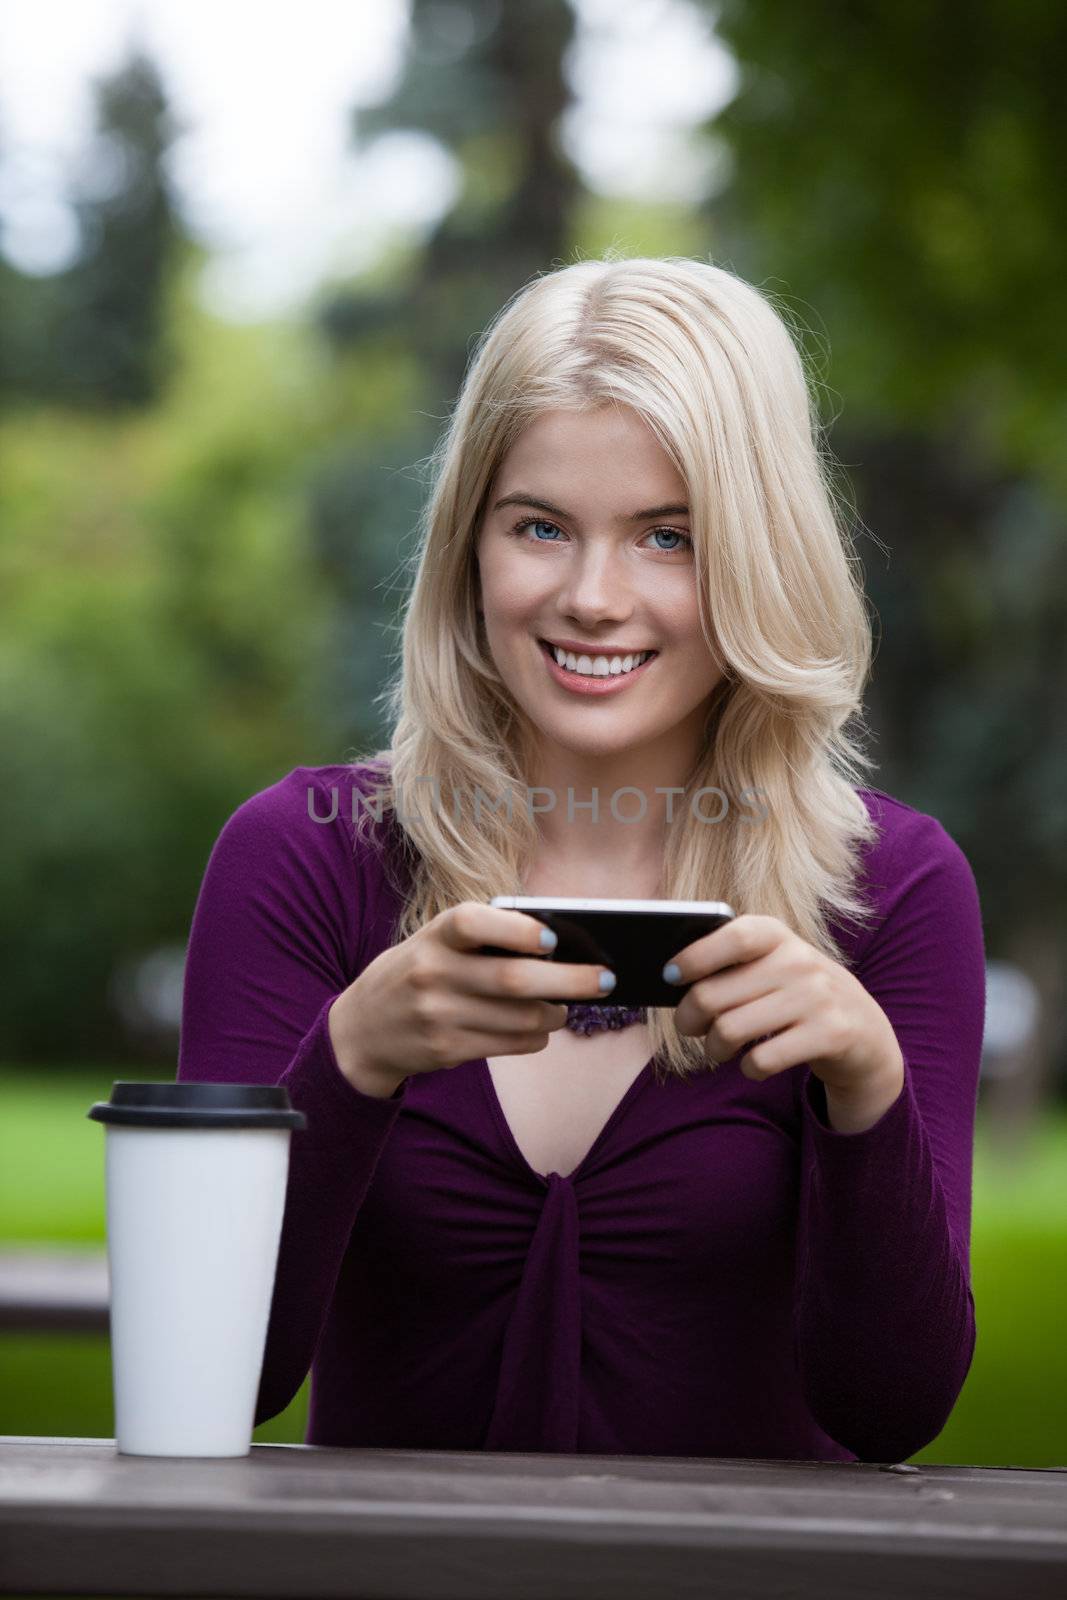 Portrait of a smiling woman using a mobile phone in park